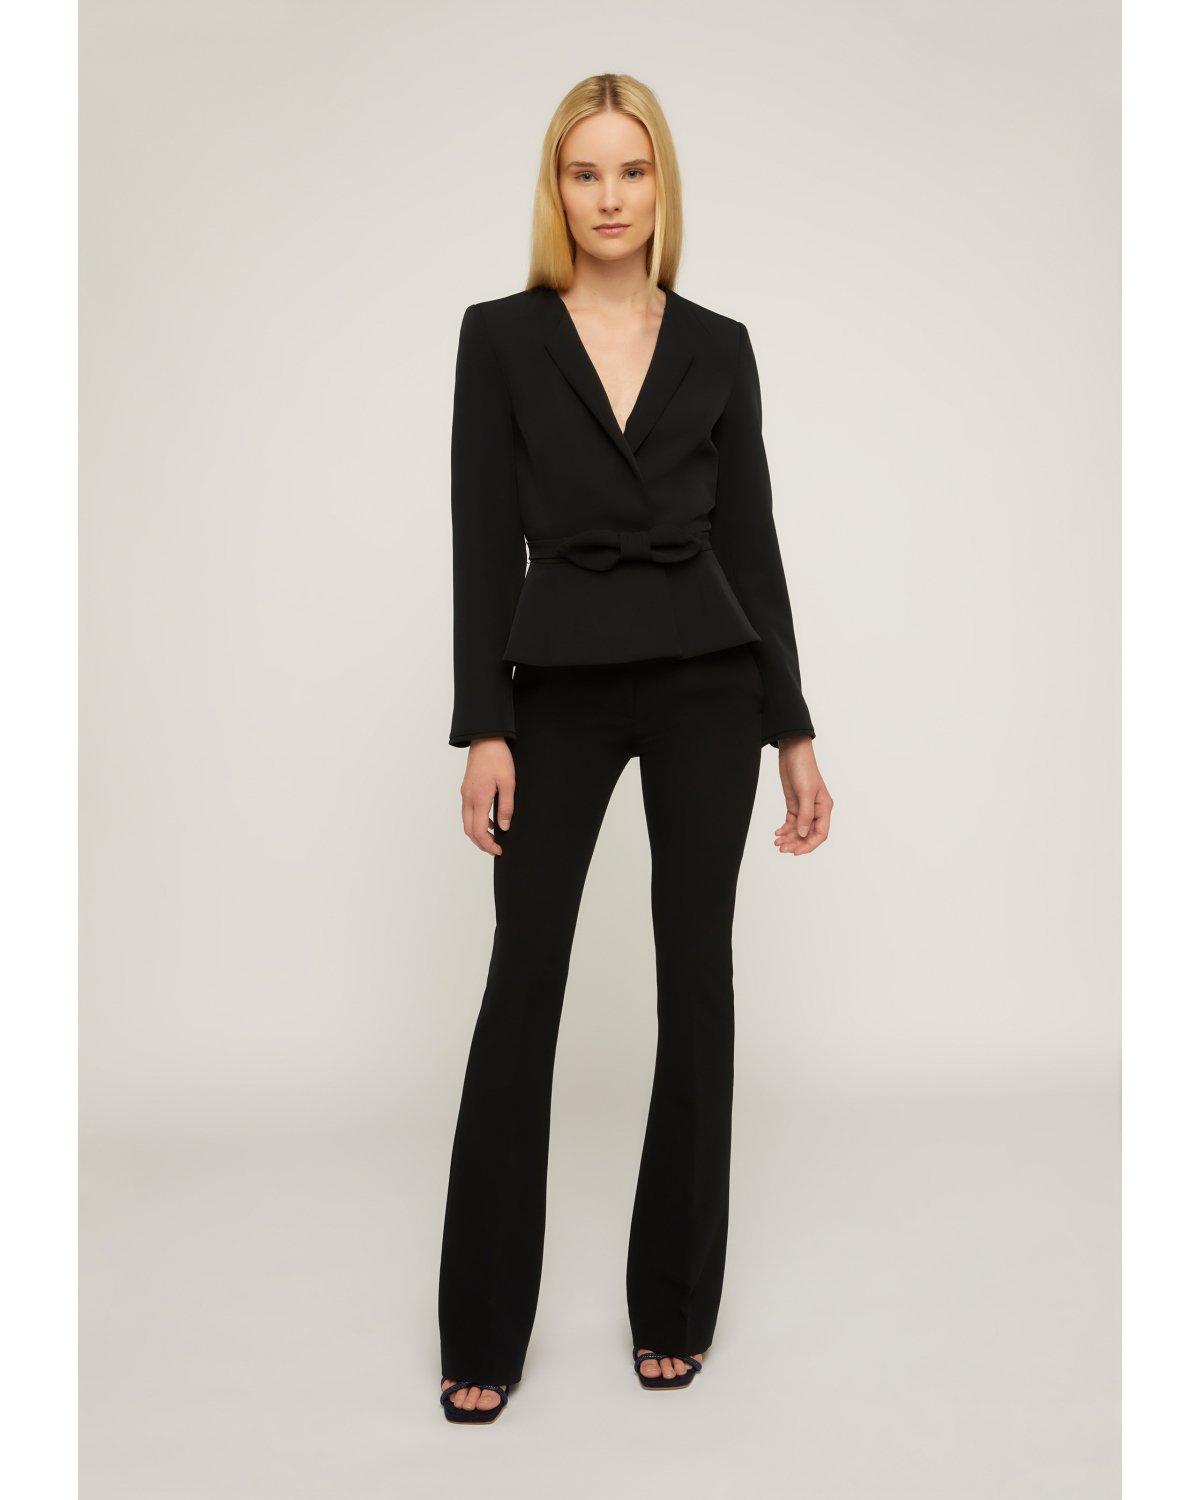 Black tight trousers | 73_74 | Genny